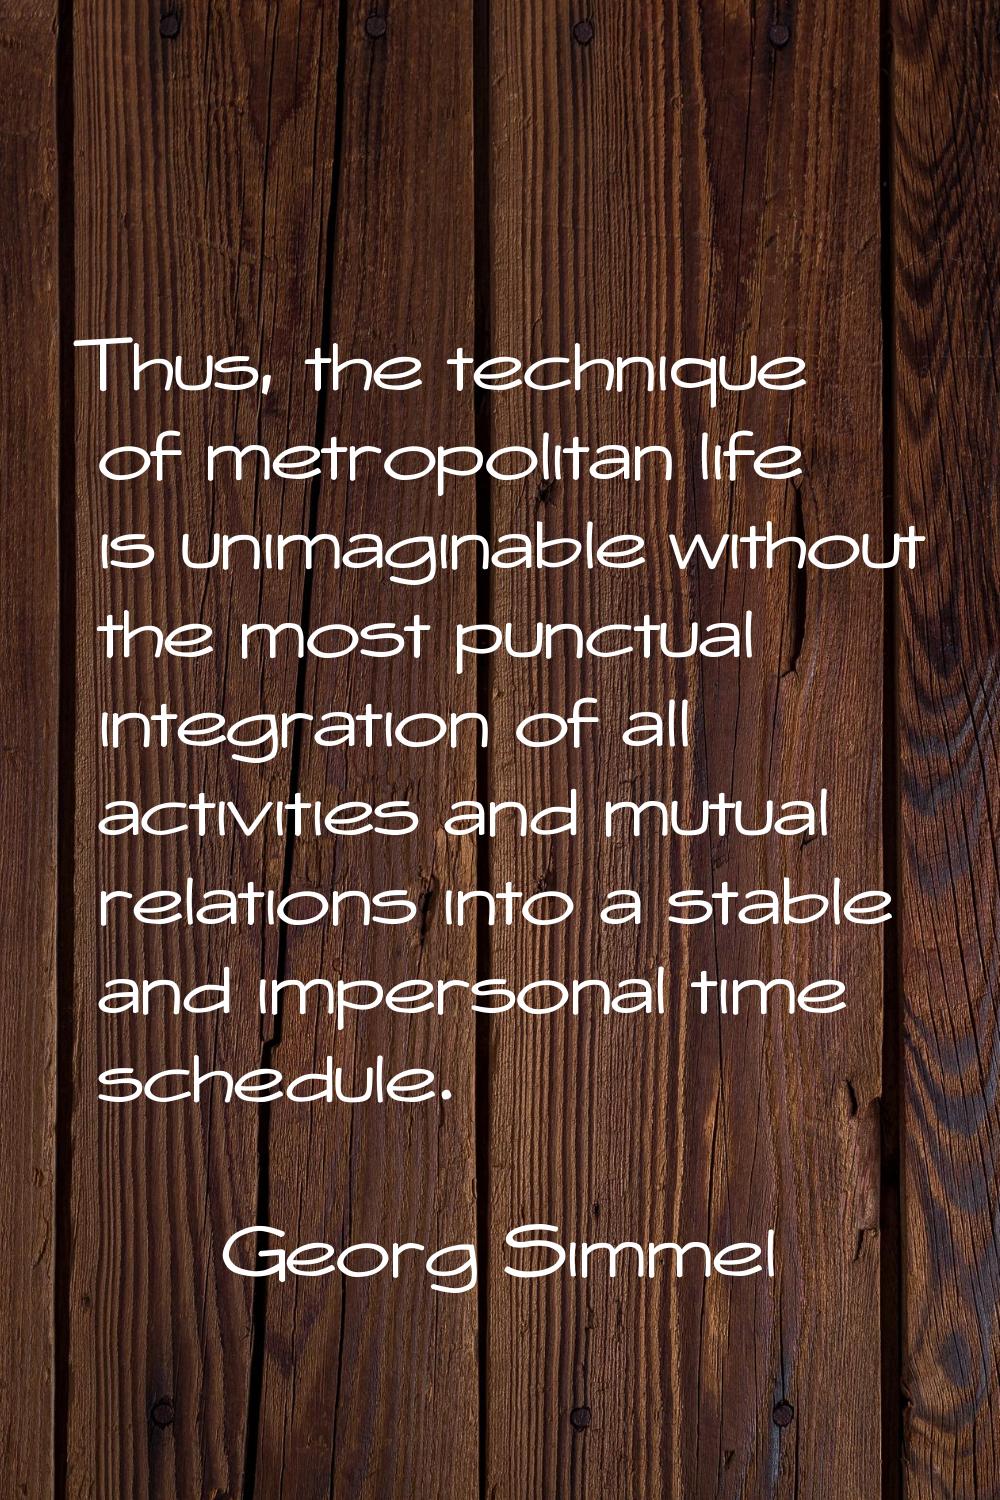 Thus, the technique of metropolitan life is unimaginable without the most punctual integration of a